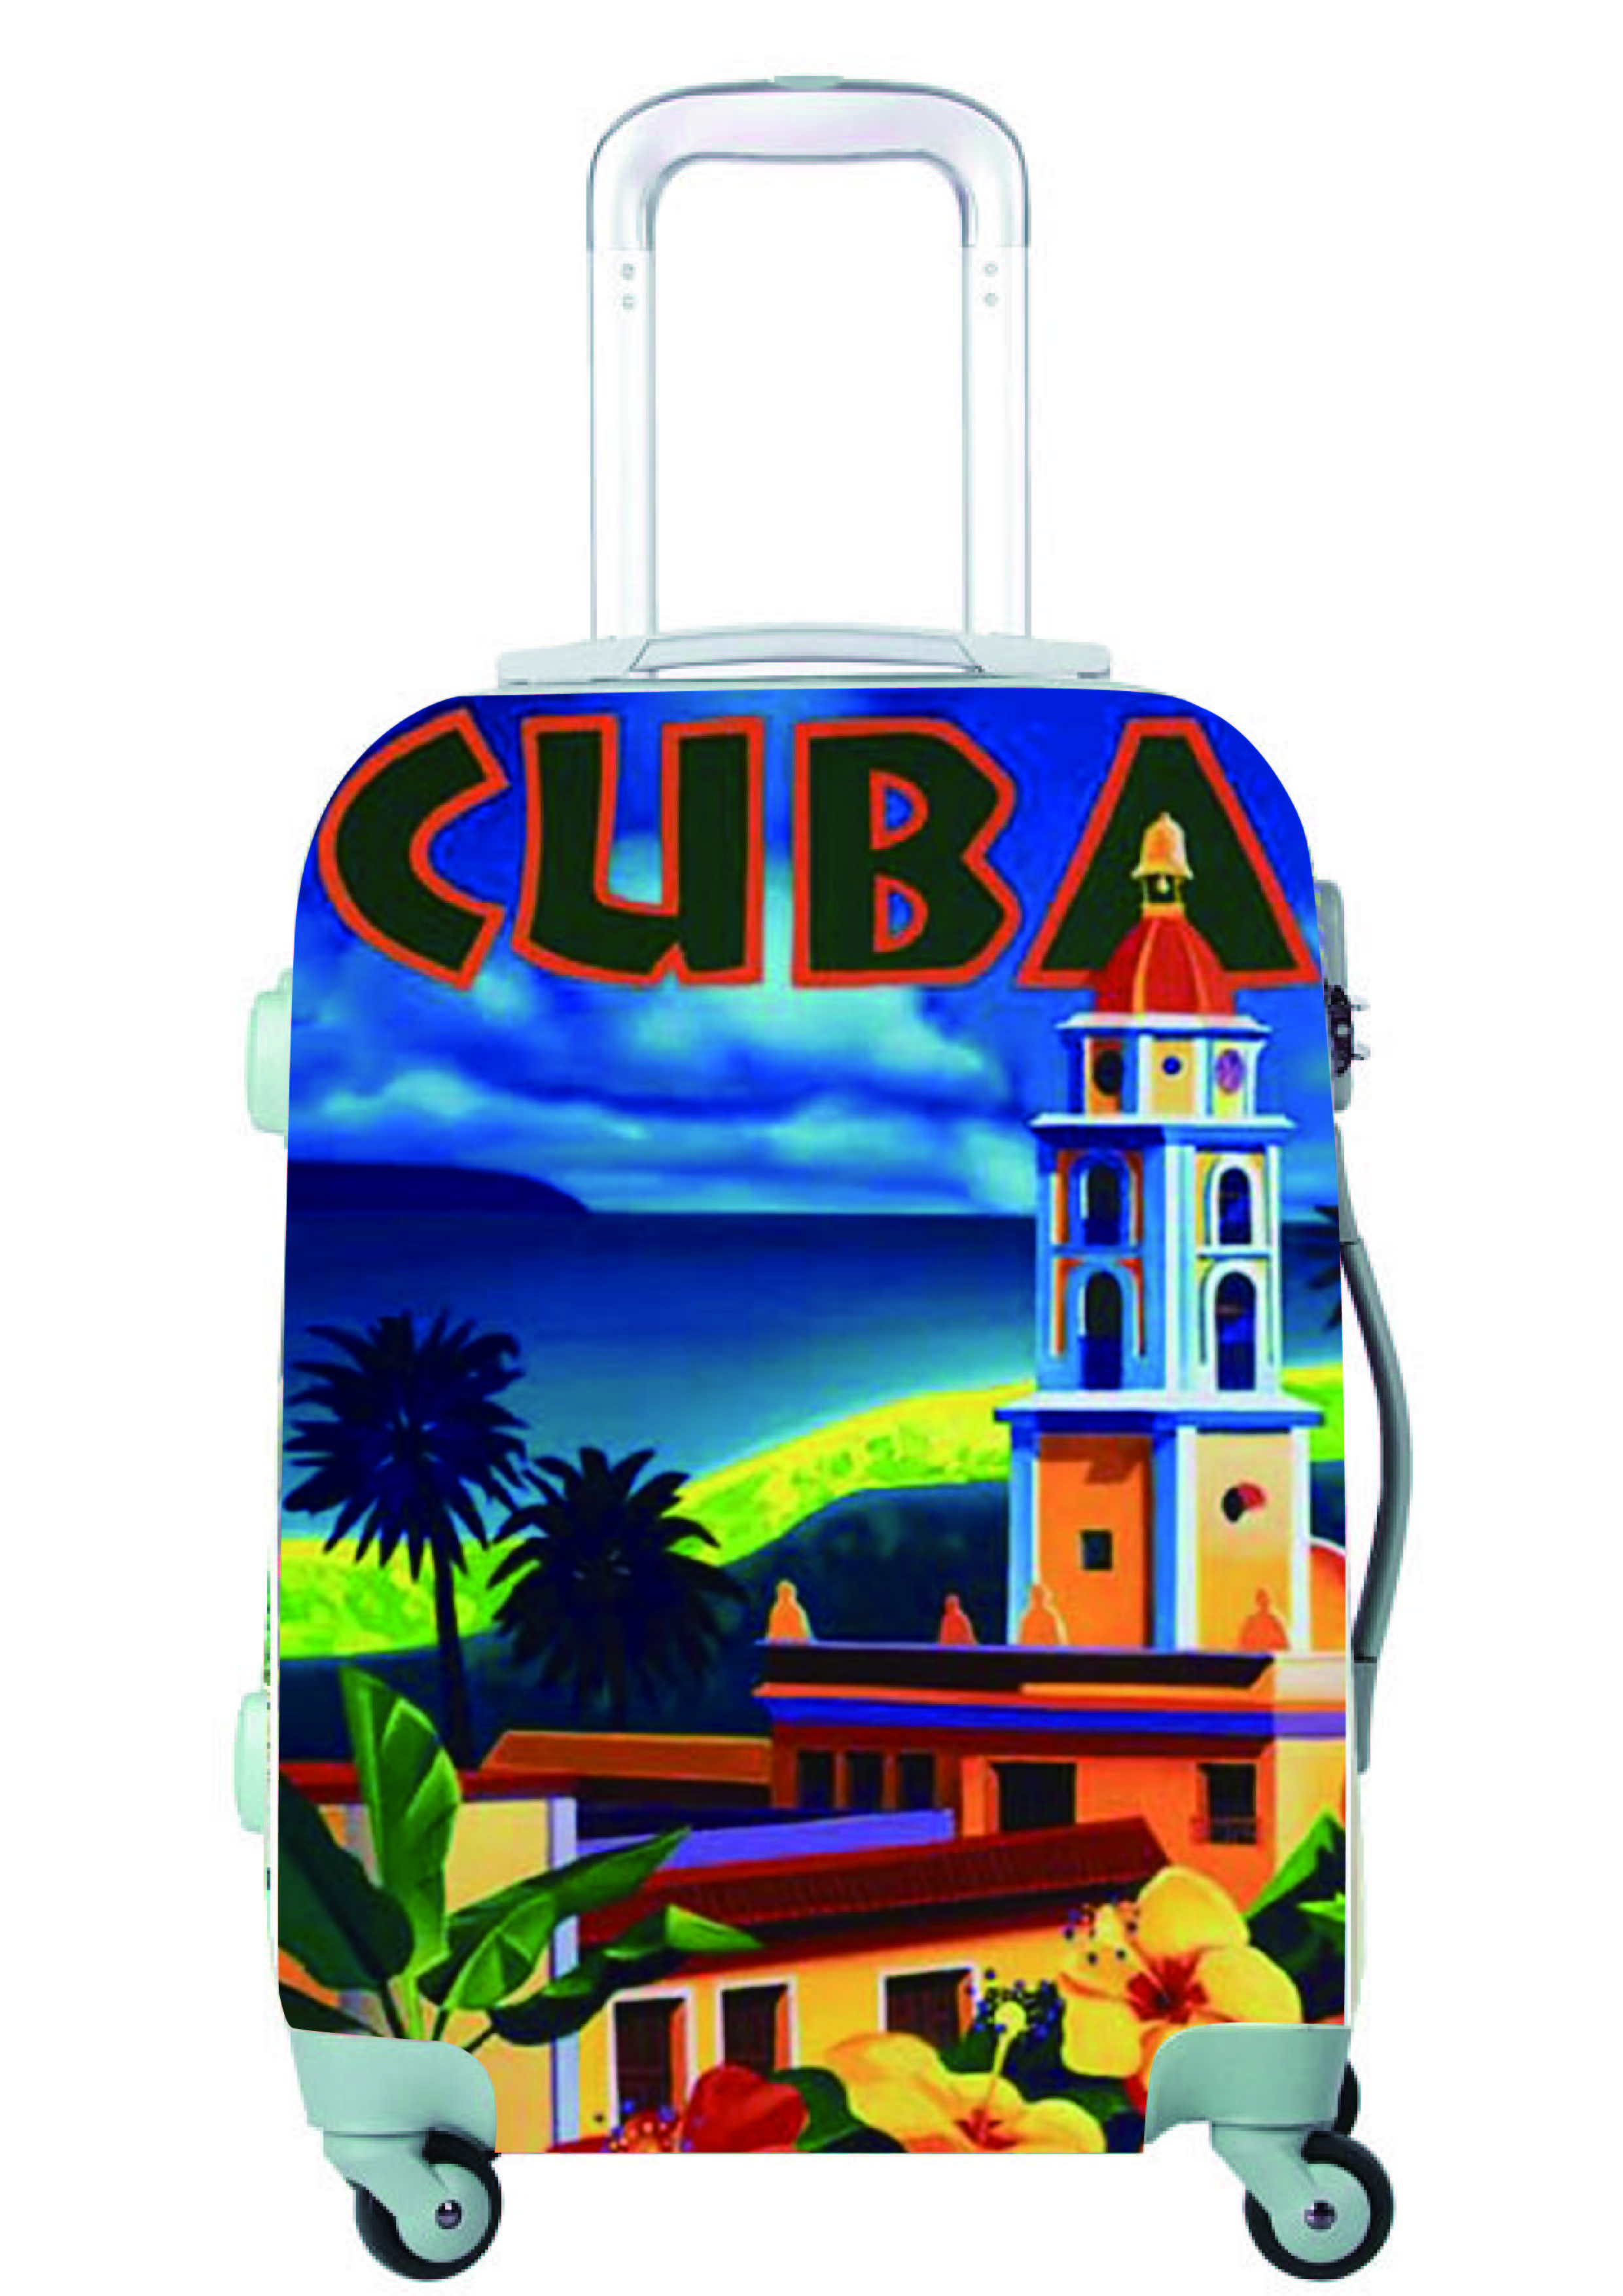 Get Vintage Travel Poster Related Luggage